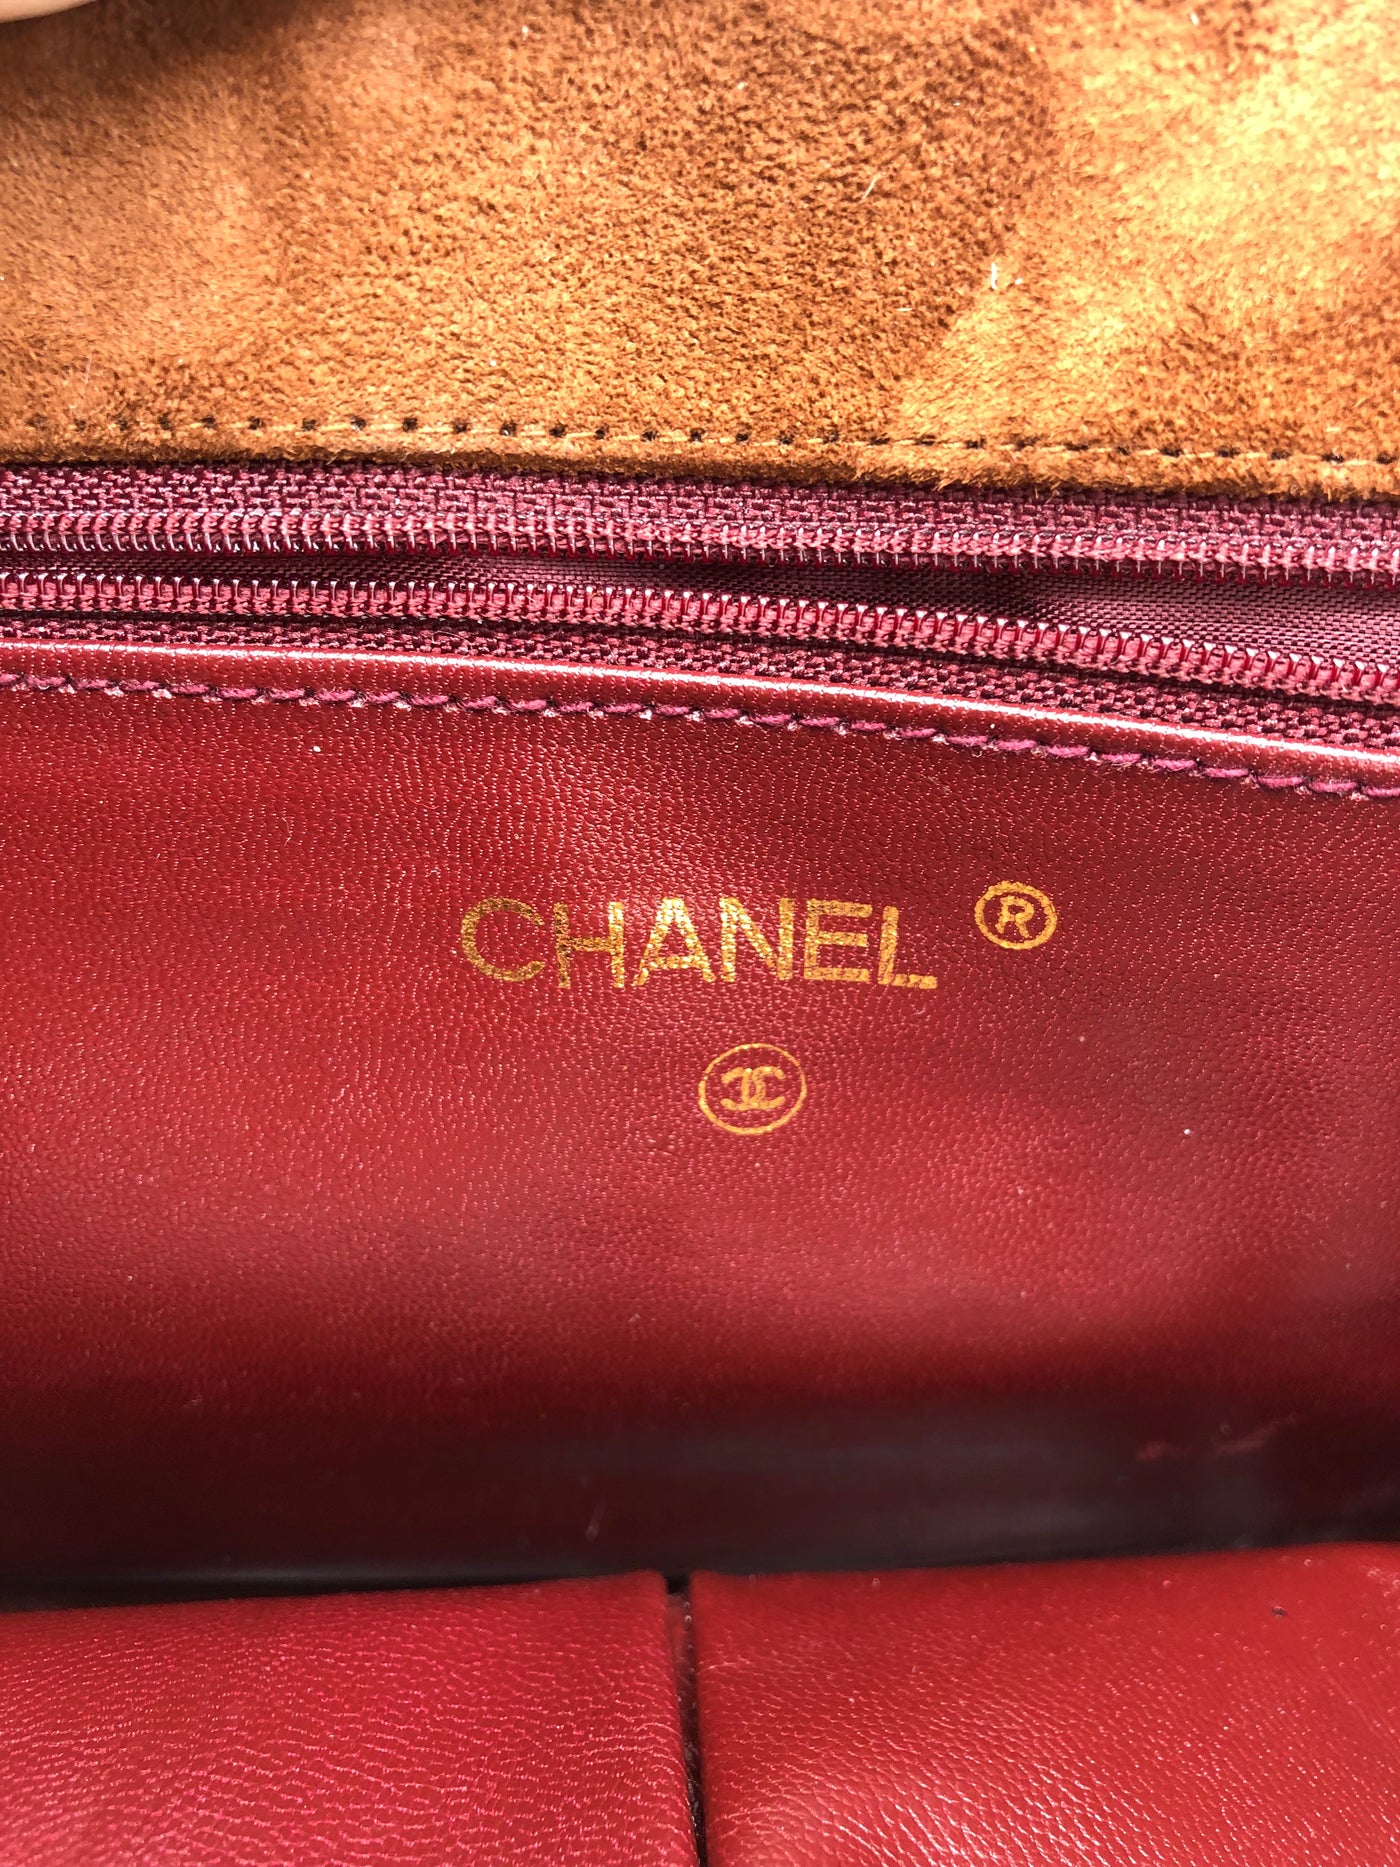 CHANEL Rare Early 1980’s Trapezoid Handbag with GHW Bijoux Chain